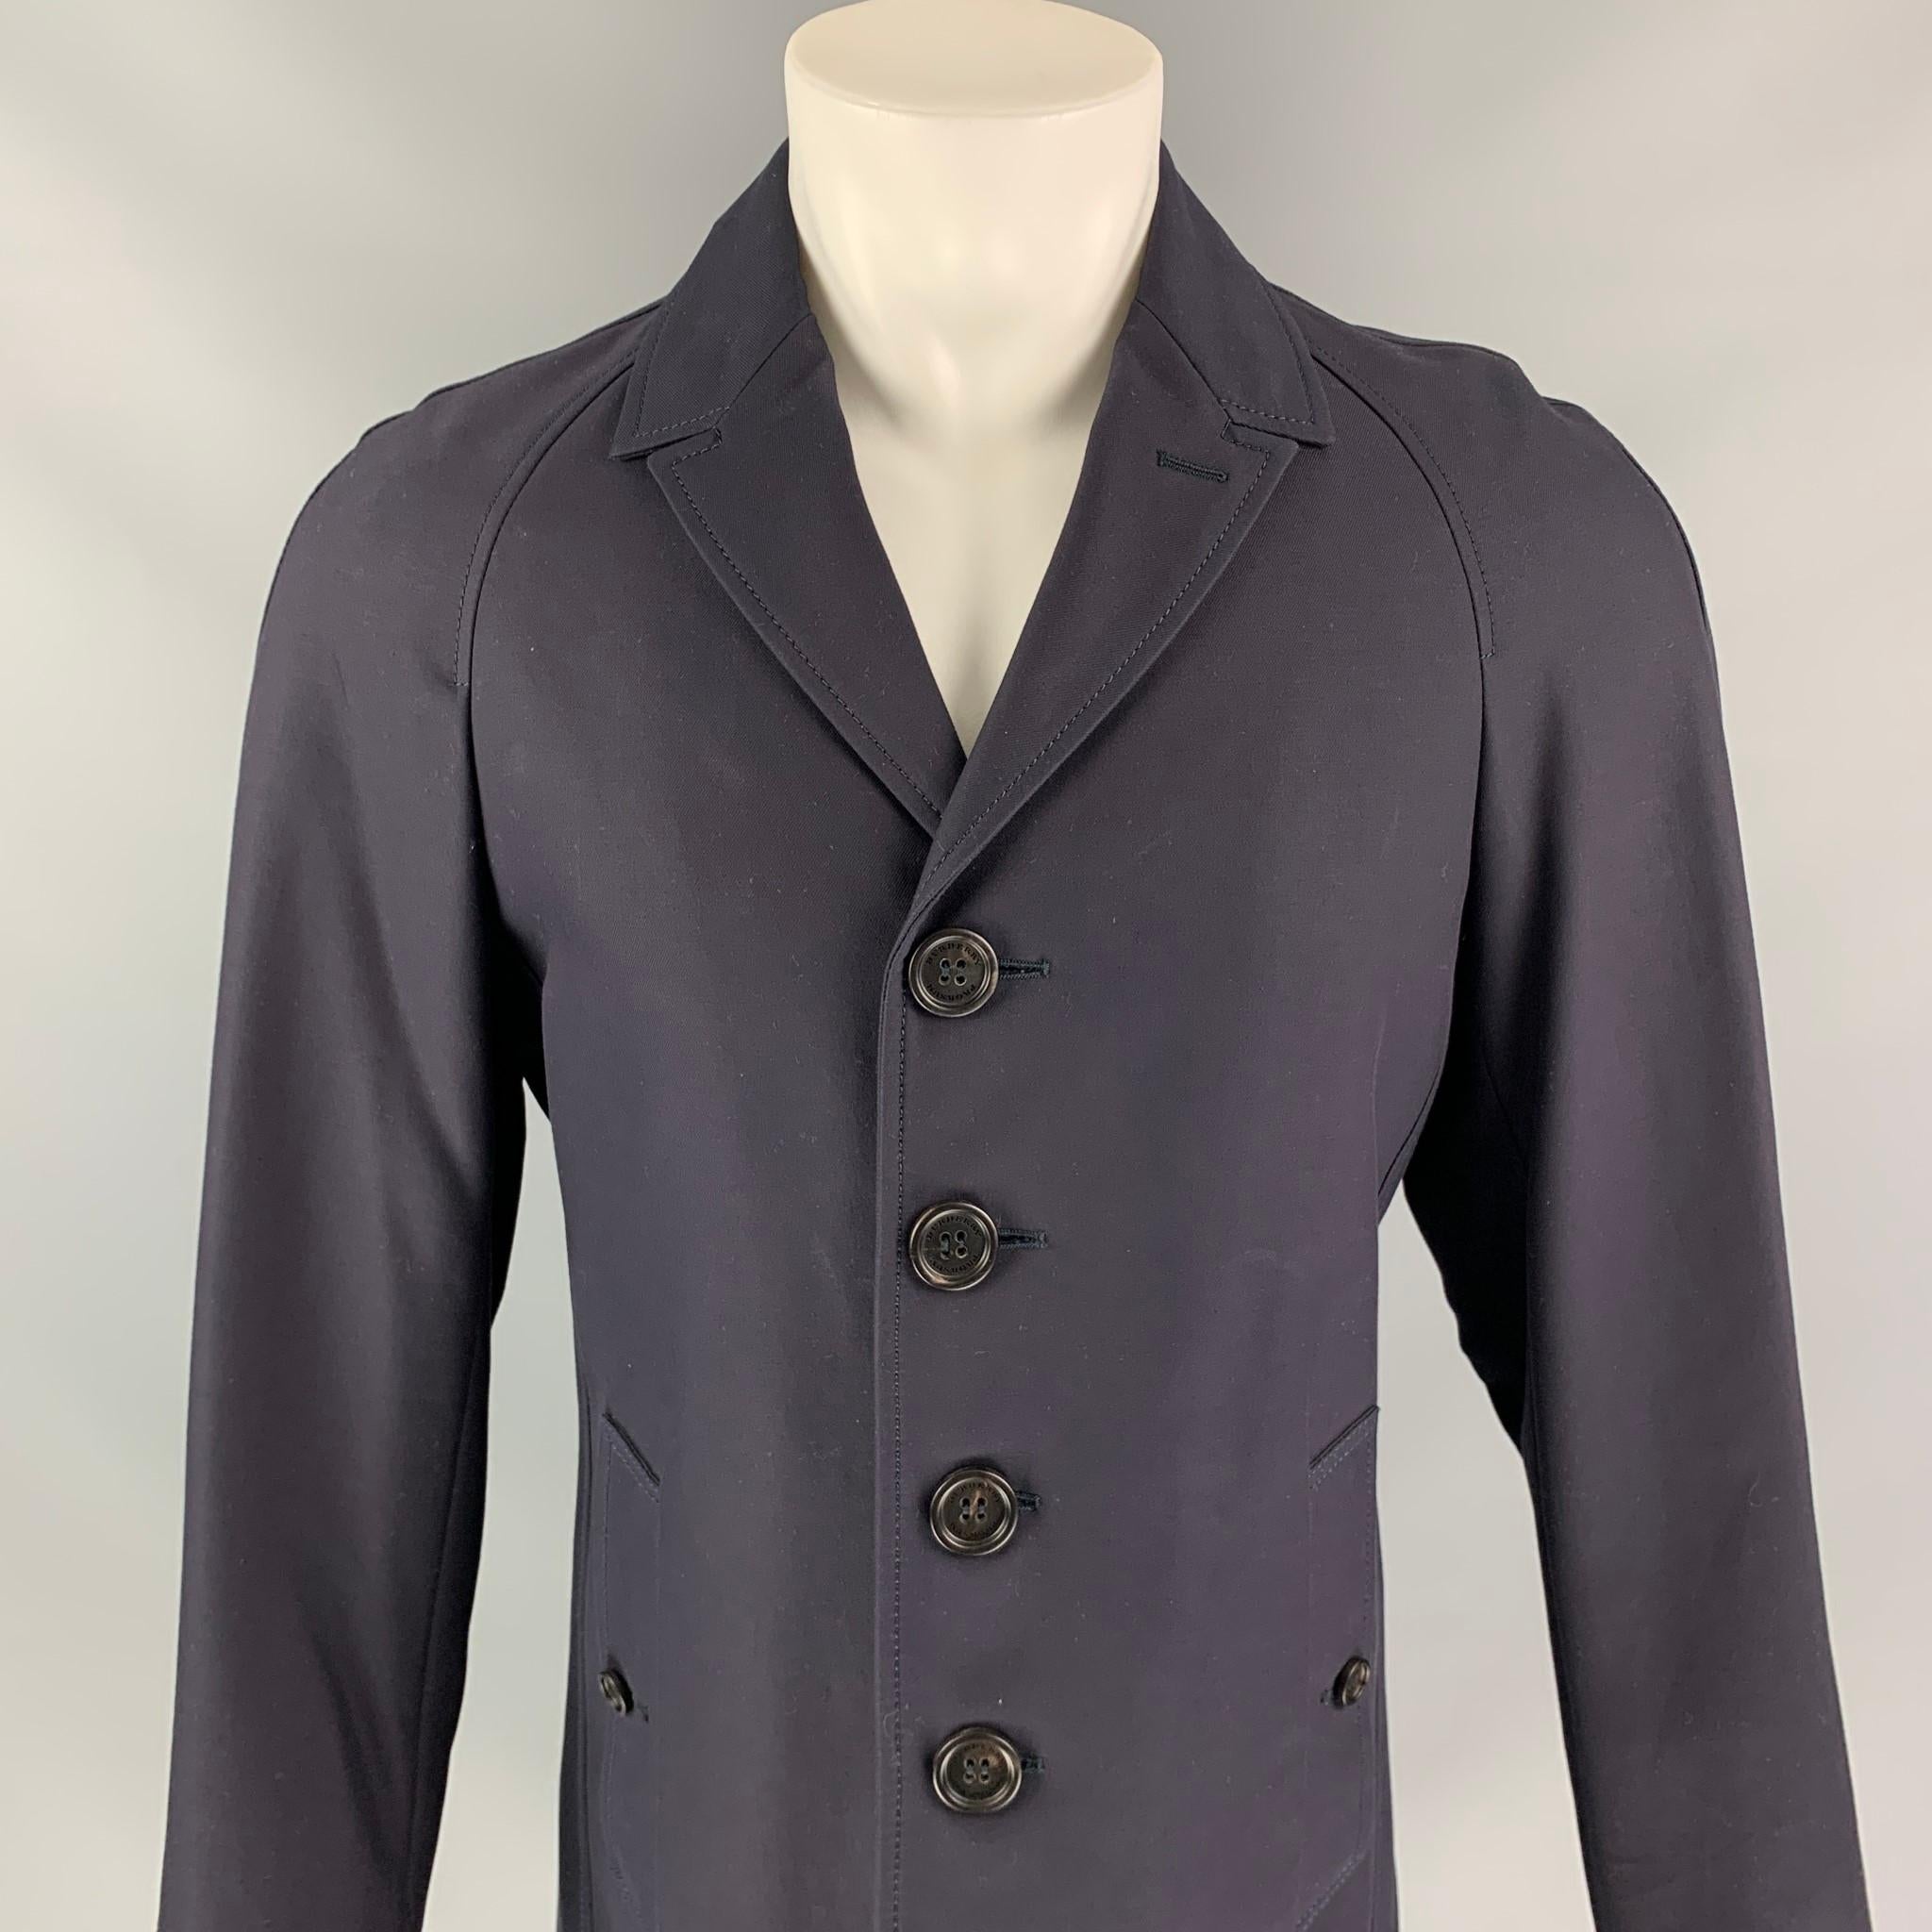 Burberry Prorsum Pre-Fall 2013 Navy Blue Overcoat by Christopher Bailey, lightweight, logo lining, collar, slit pockets and four button closure. Made in Italy.

Very Good Condition. Light wear.
Marked:  M  US38, IT48

Measurements:

Chest: 38